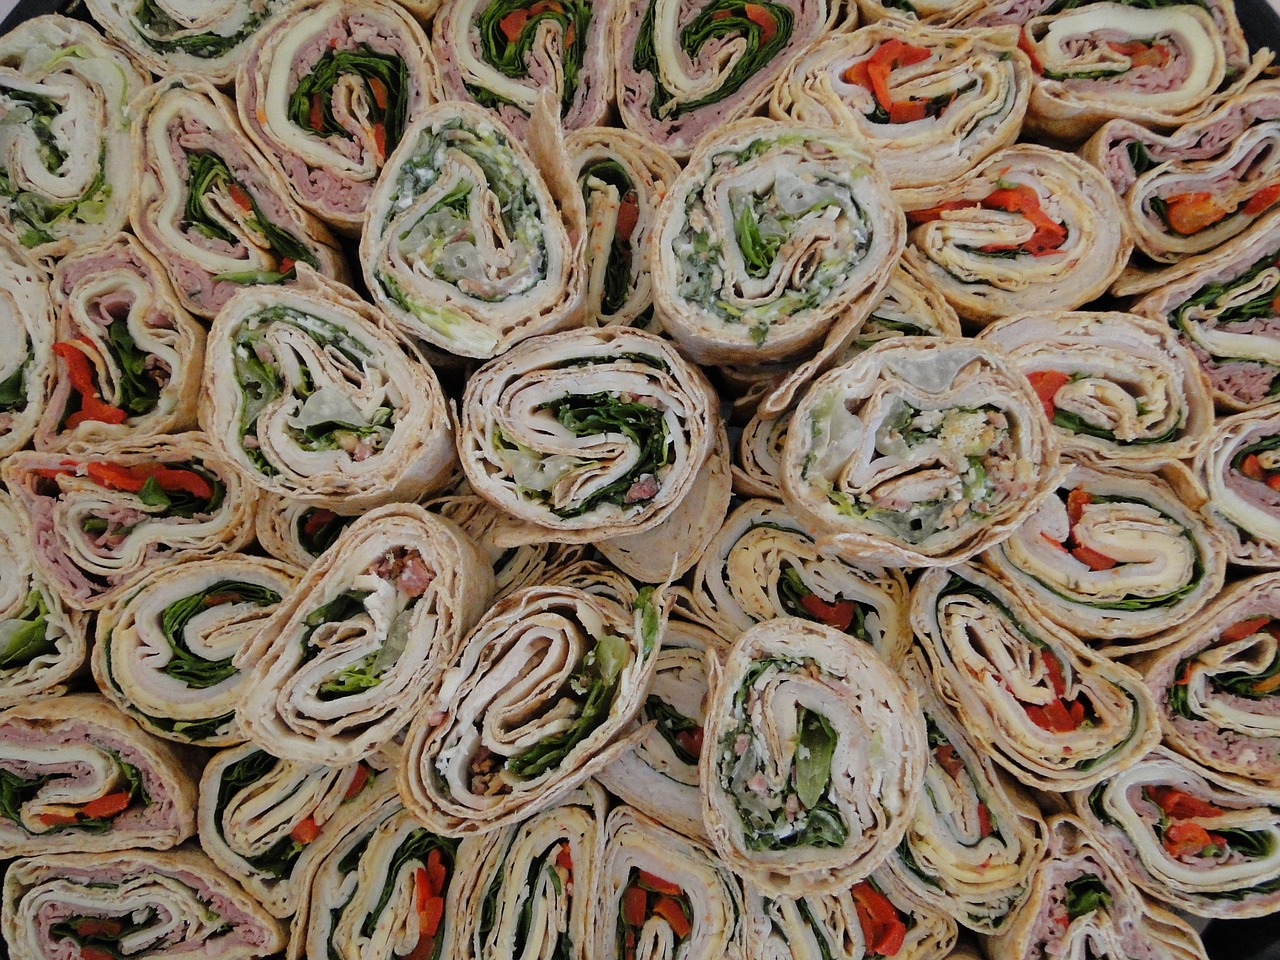 A large platter of turkey wraps placed vertically